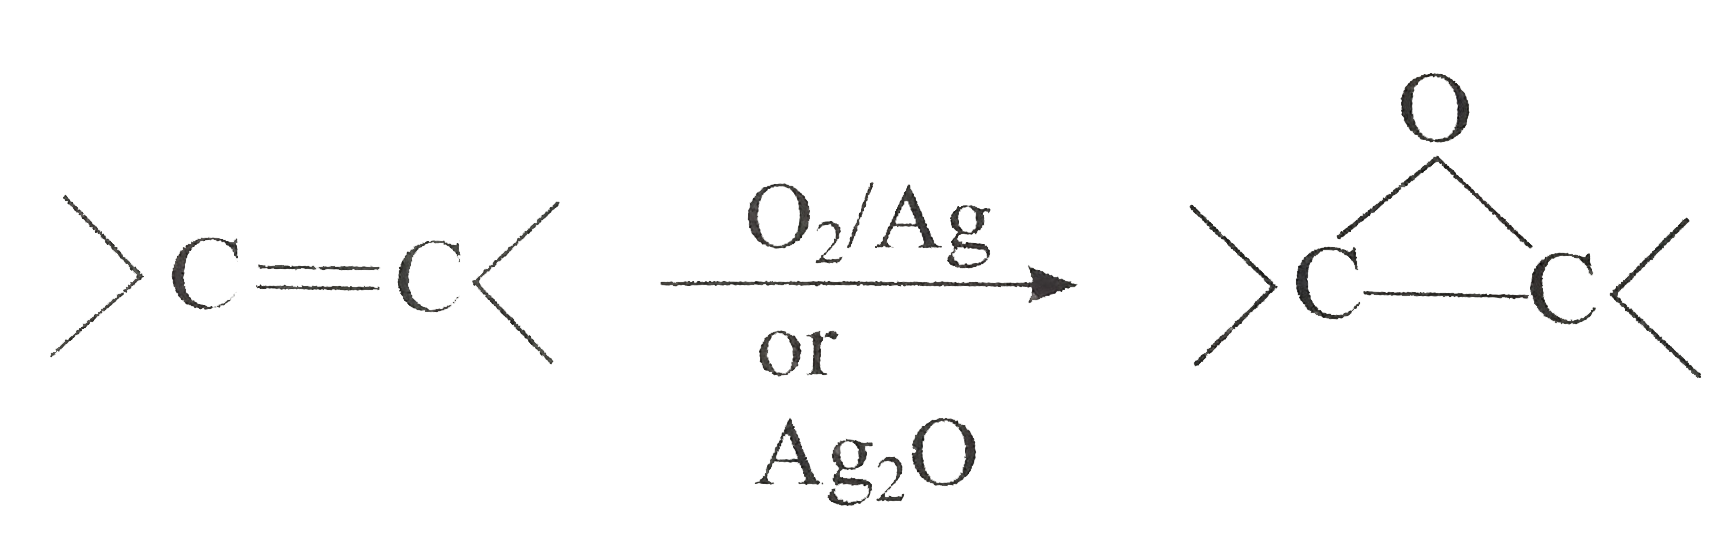 Oxidation without clevage of sigma bond takes place in alkenes.      Presence of unsaturation in alkenes is detected by using Baeyer's reagent. Alkenes decolourise pink colour of Baeyer's reagent. In presence of Baeyer's reagent, 'syn' addition of -OH groups takes place on both carbons of double bond. The net reaction can be given as,   R-CH=CH-R overset(KMnO(4))underset(OH^(-))to R-overset(OH)overset(|)(CH)-overset(OH)overset(|)(CH)-R   Ozonolysis of alkenes gives ozonide, which on further hydrolysis gives aldehyde and/ or ketone.      ortho Xylene on reductive ozonolysis will be: